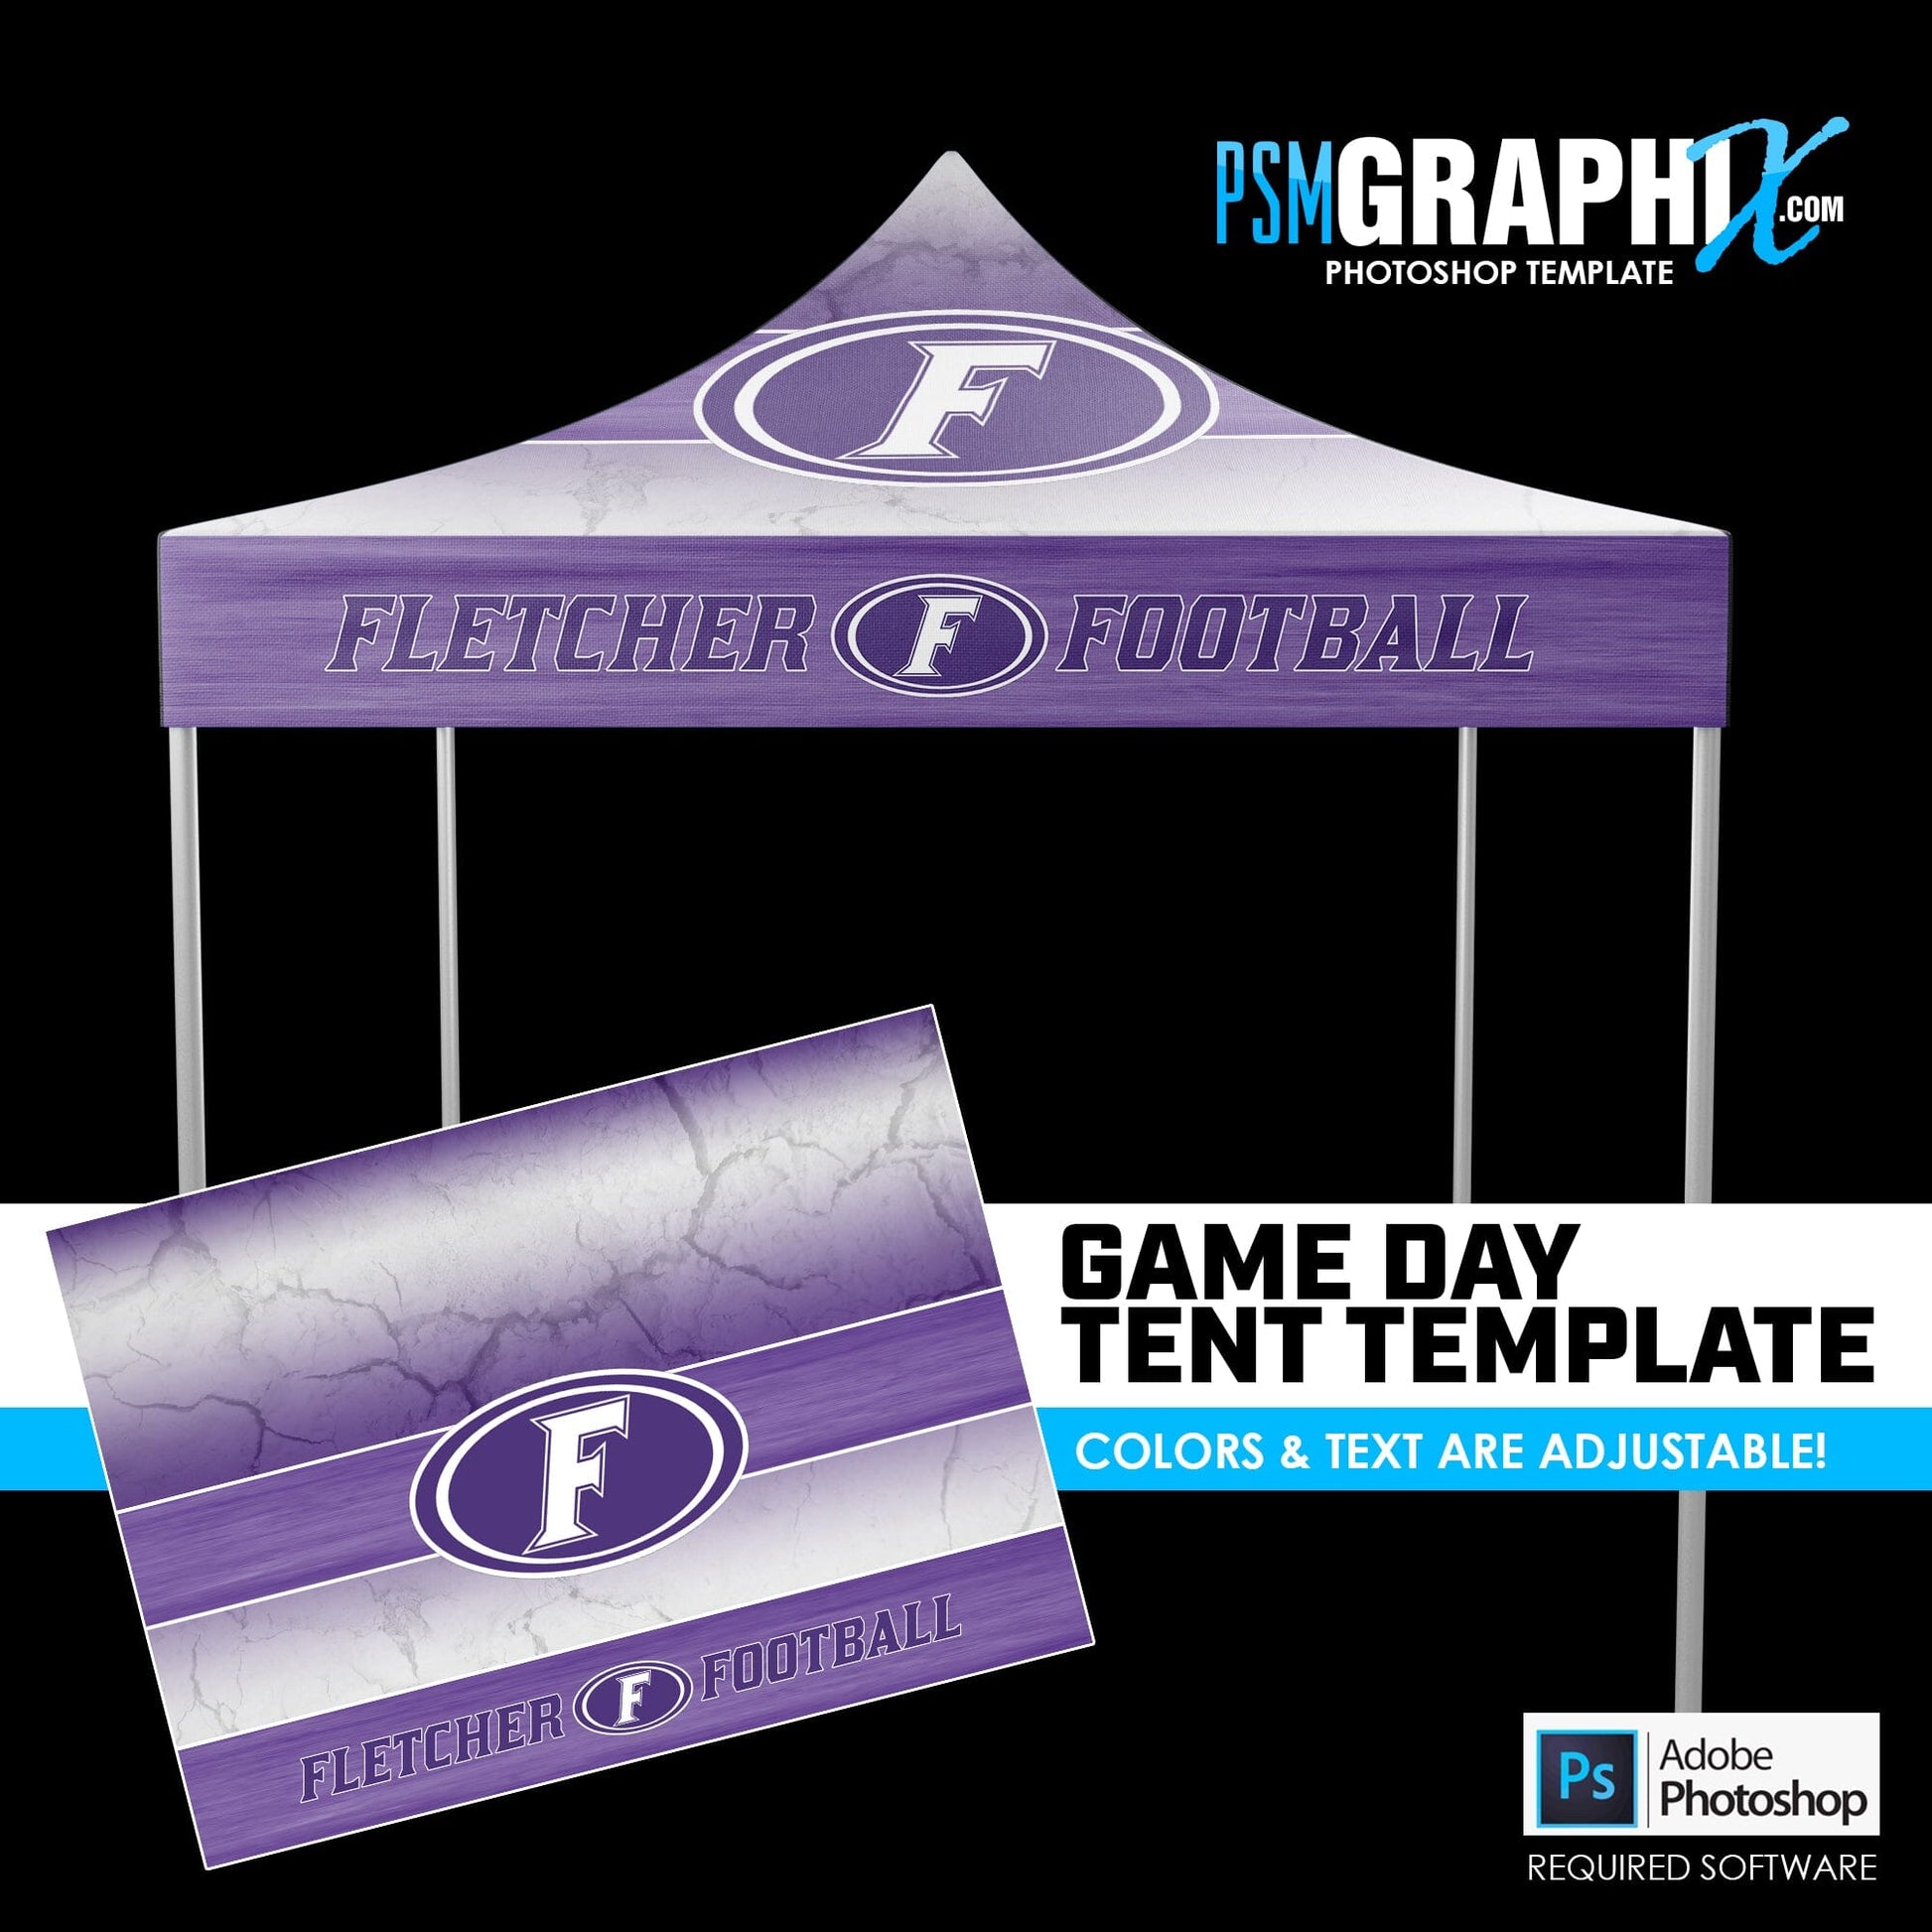 Metal V.1 - Game Day Photoshop Tent Template-Photoshop Template - PSMGraphix